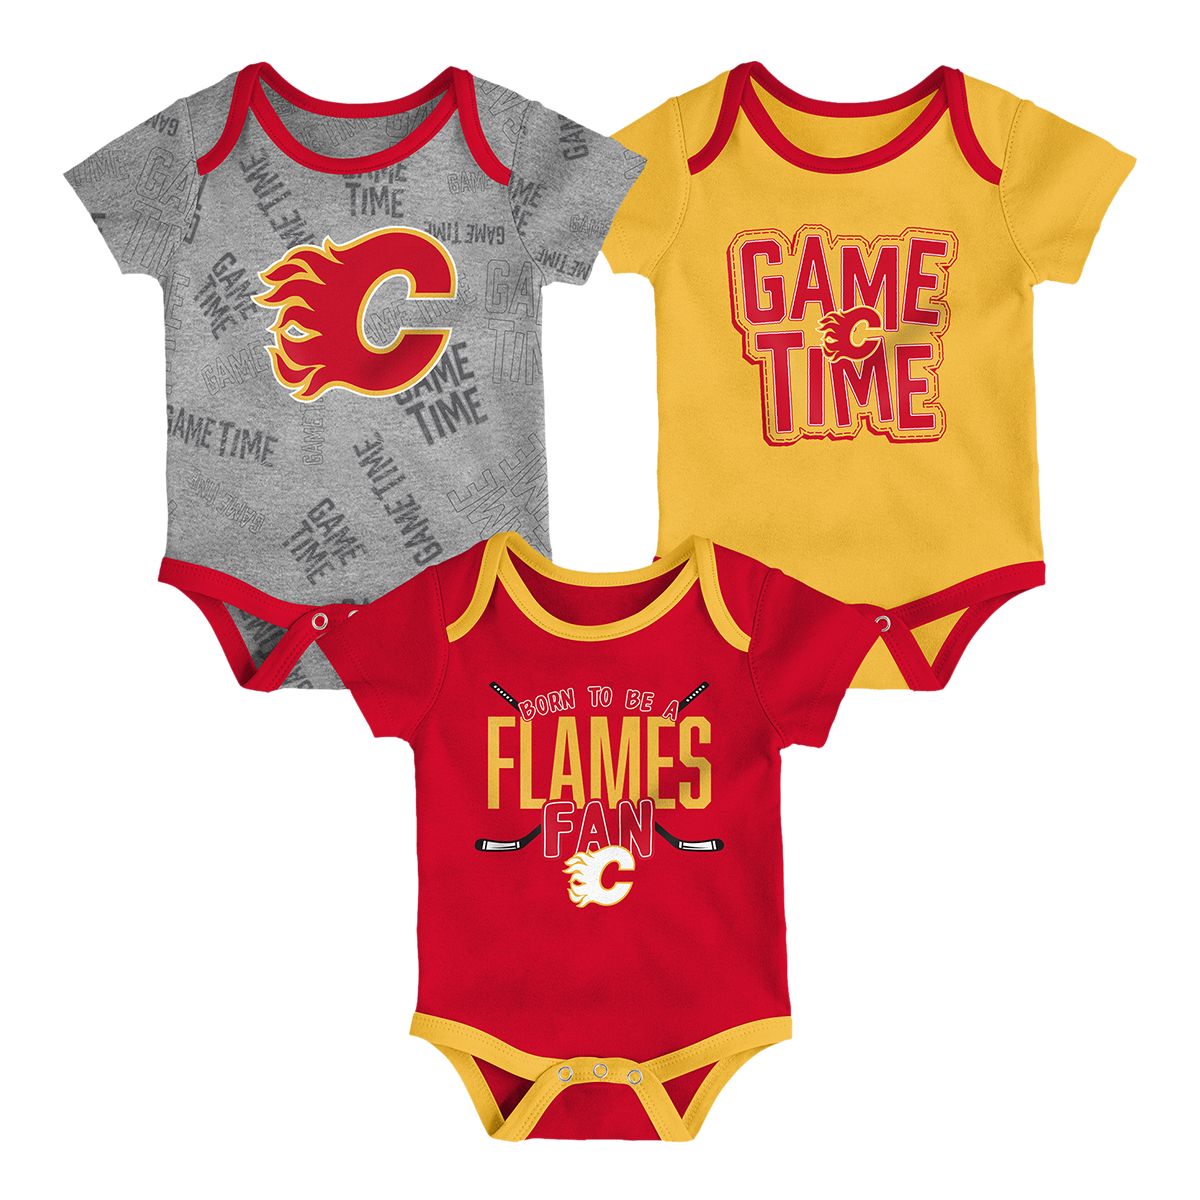 Calgary Flames Baby Clothing, Flames Infant Jerseys, Toddler